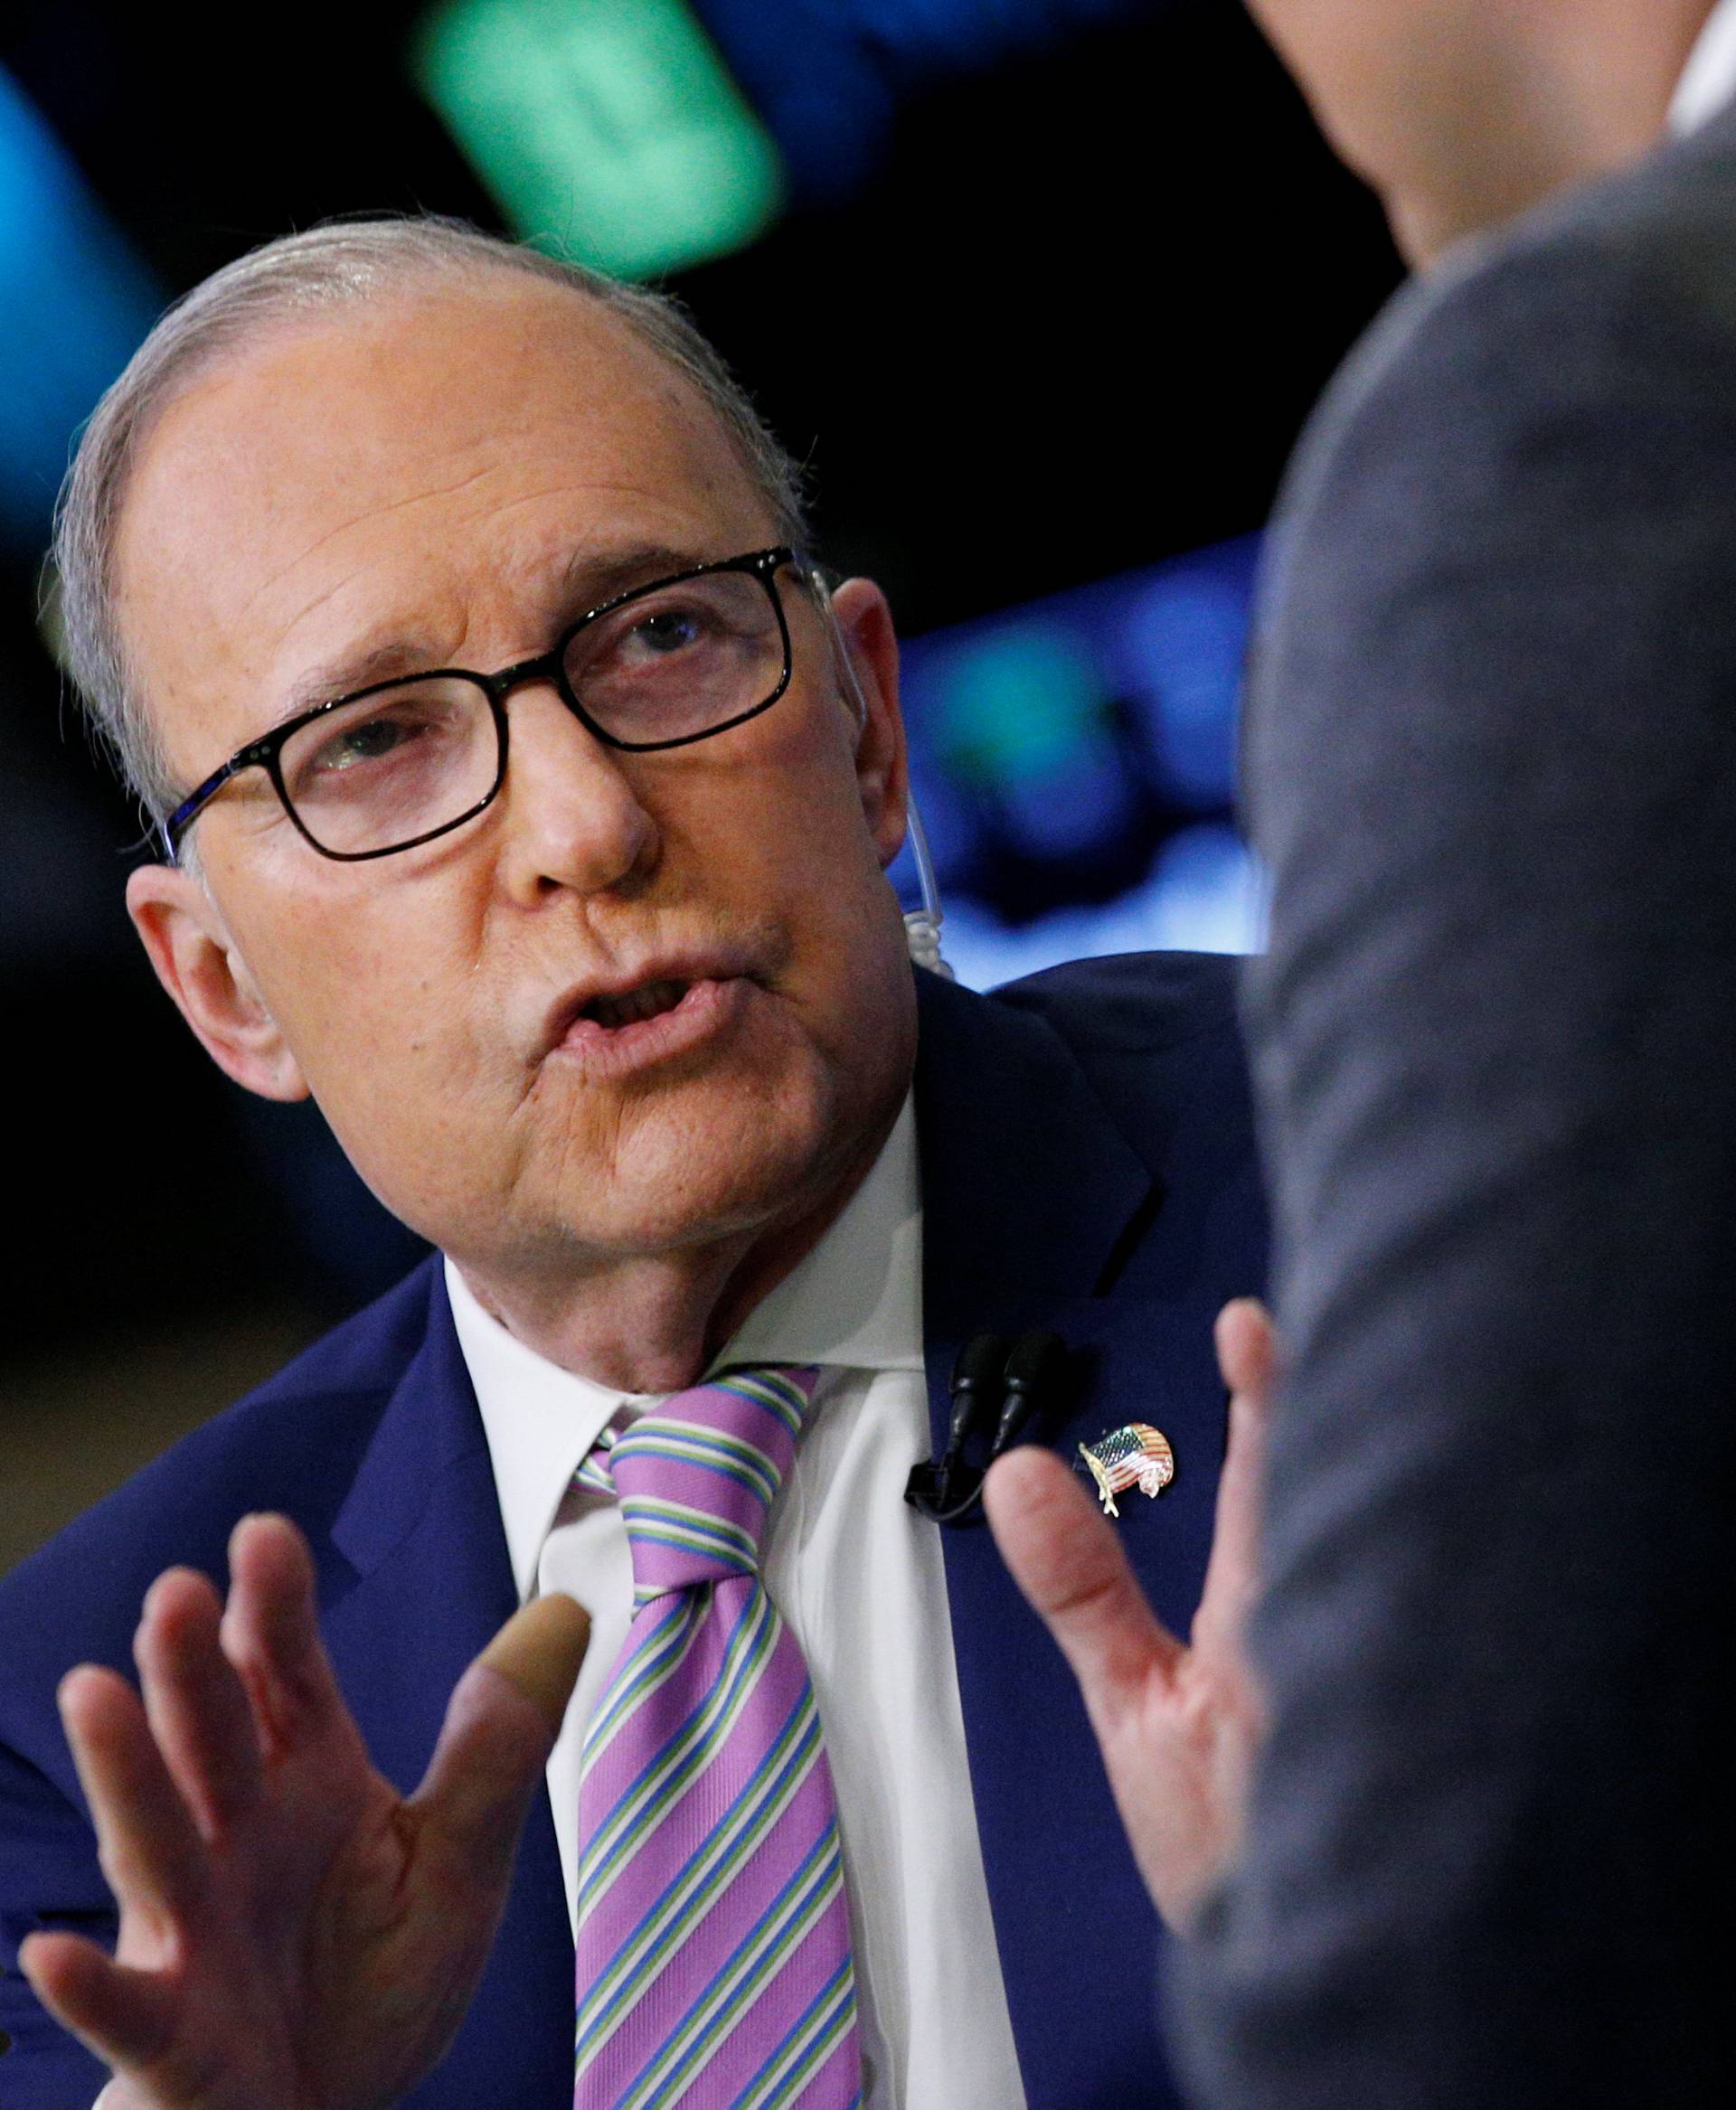 Economic analyst Lawrence "Larry" Kudlow appears on CNBC at the NYSE in New York